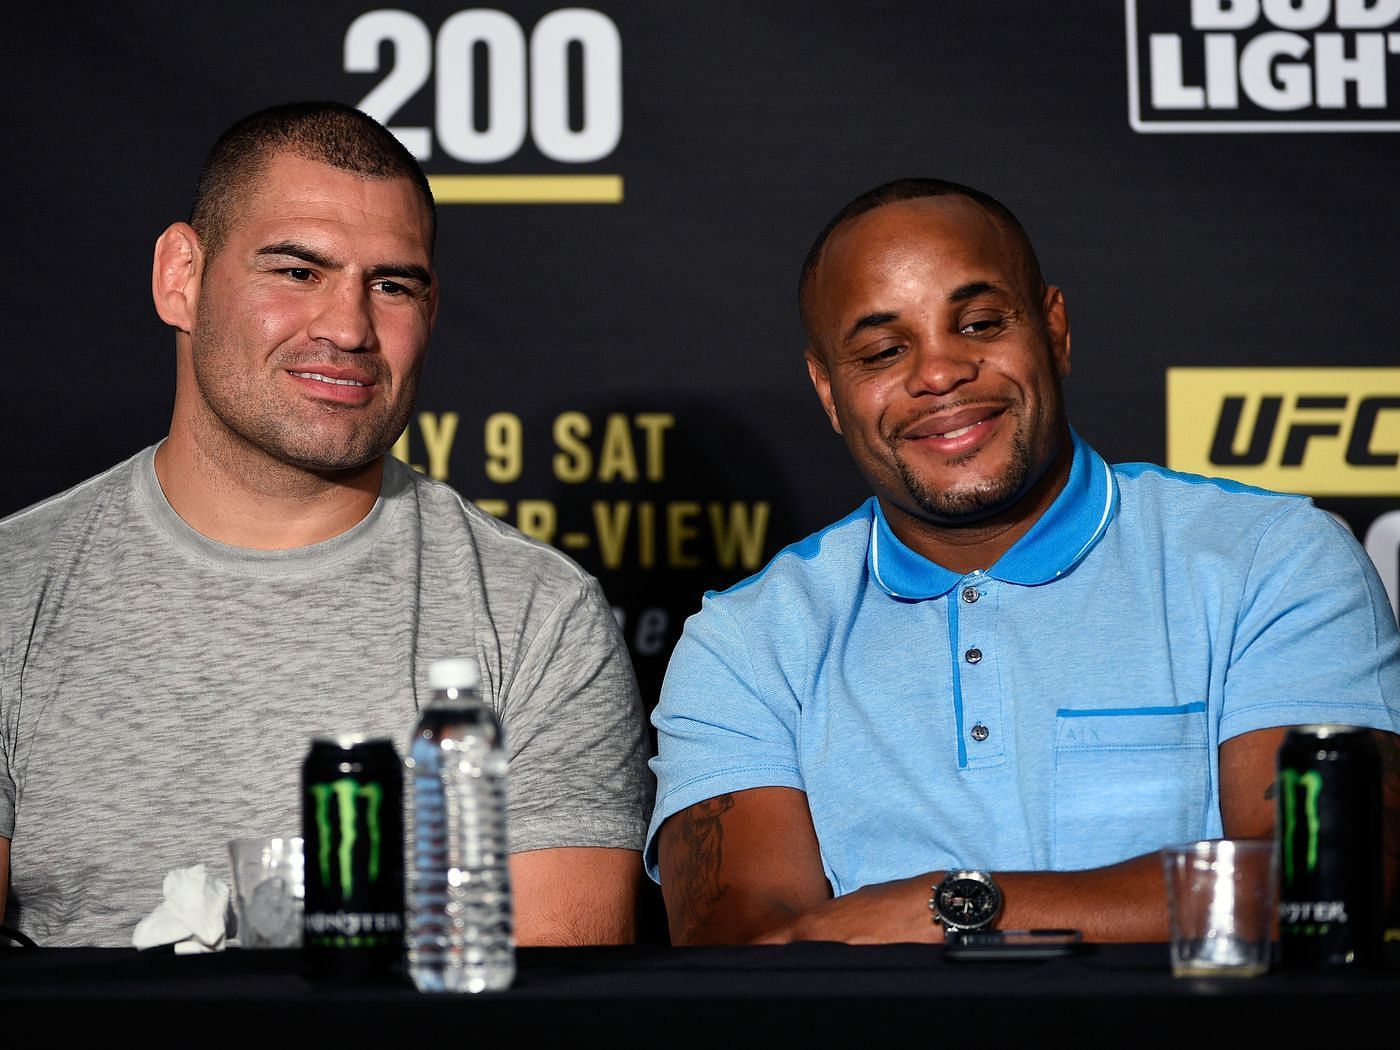 Daniel Cormier has always claimed that he could never get the better of teammate Cain Velasquez